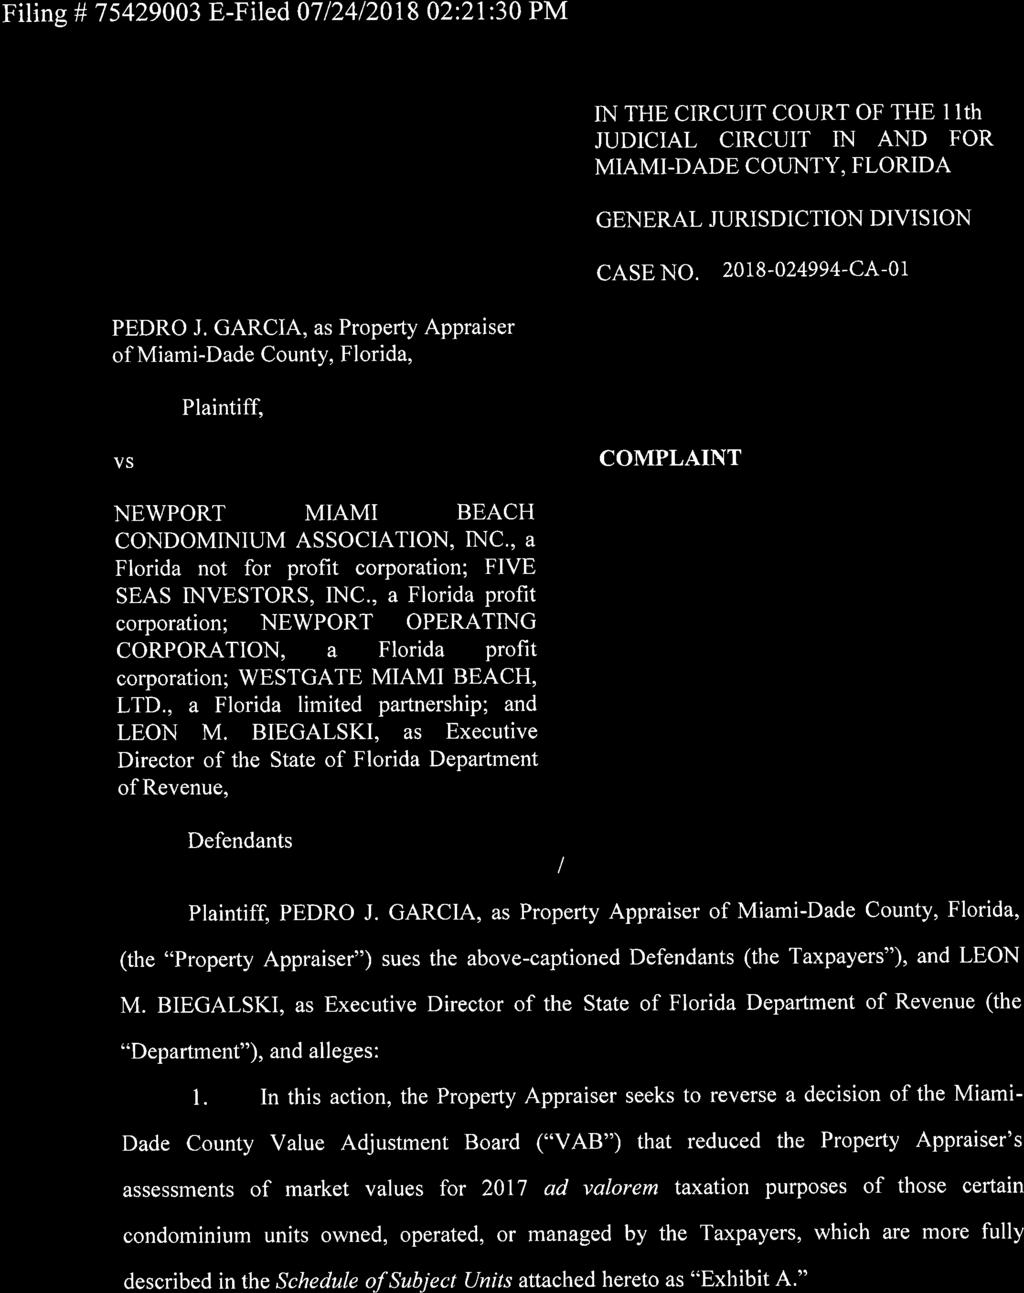 Filing # 75429003 E-Filed 0712412018 02:21:30 PM IN THE CIRCUIT COURT OF THE I lth JUDICIAL CIRCUIT IN AND FOR MIAMI-DADE COUNTY, FLORIDA GENERAL JURISDICTION DIVISION CASENO.